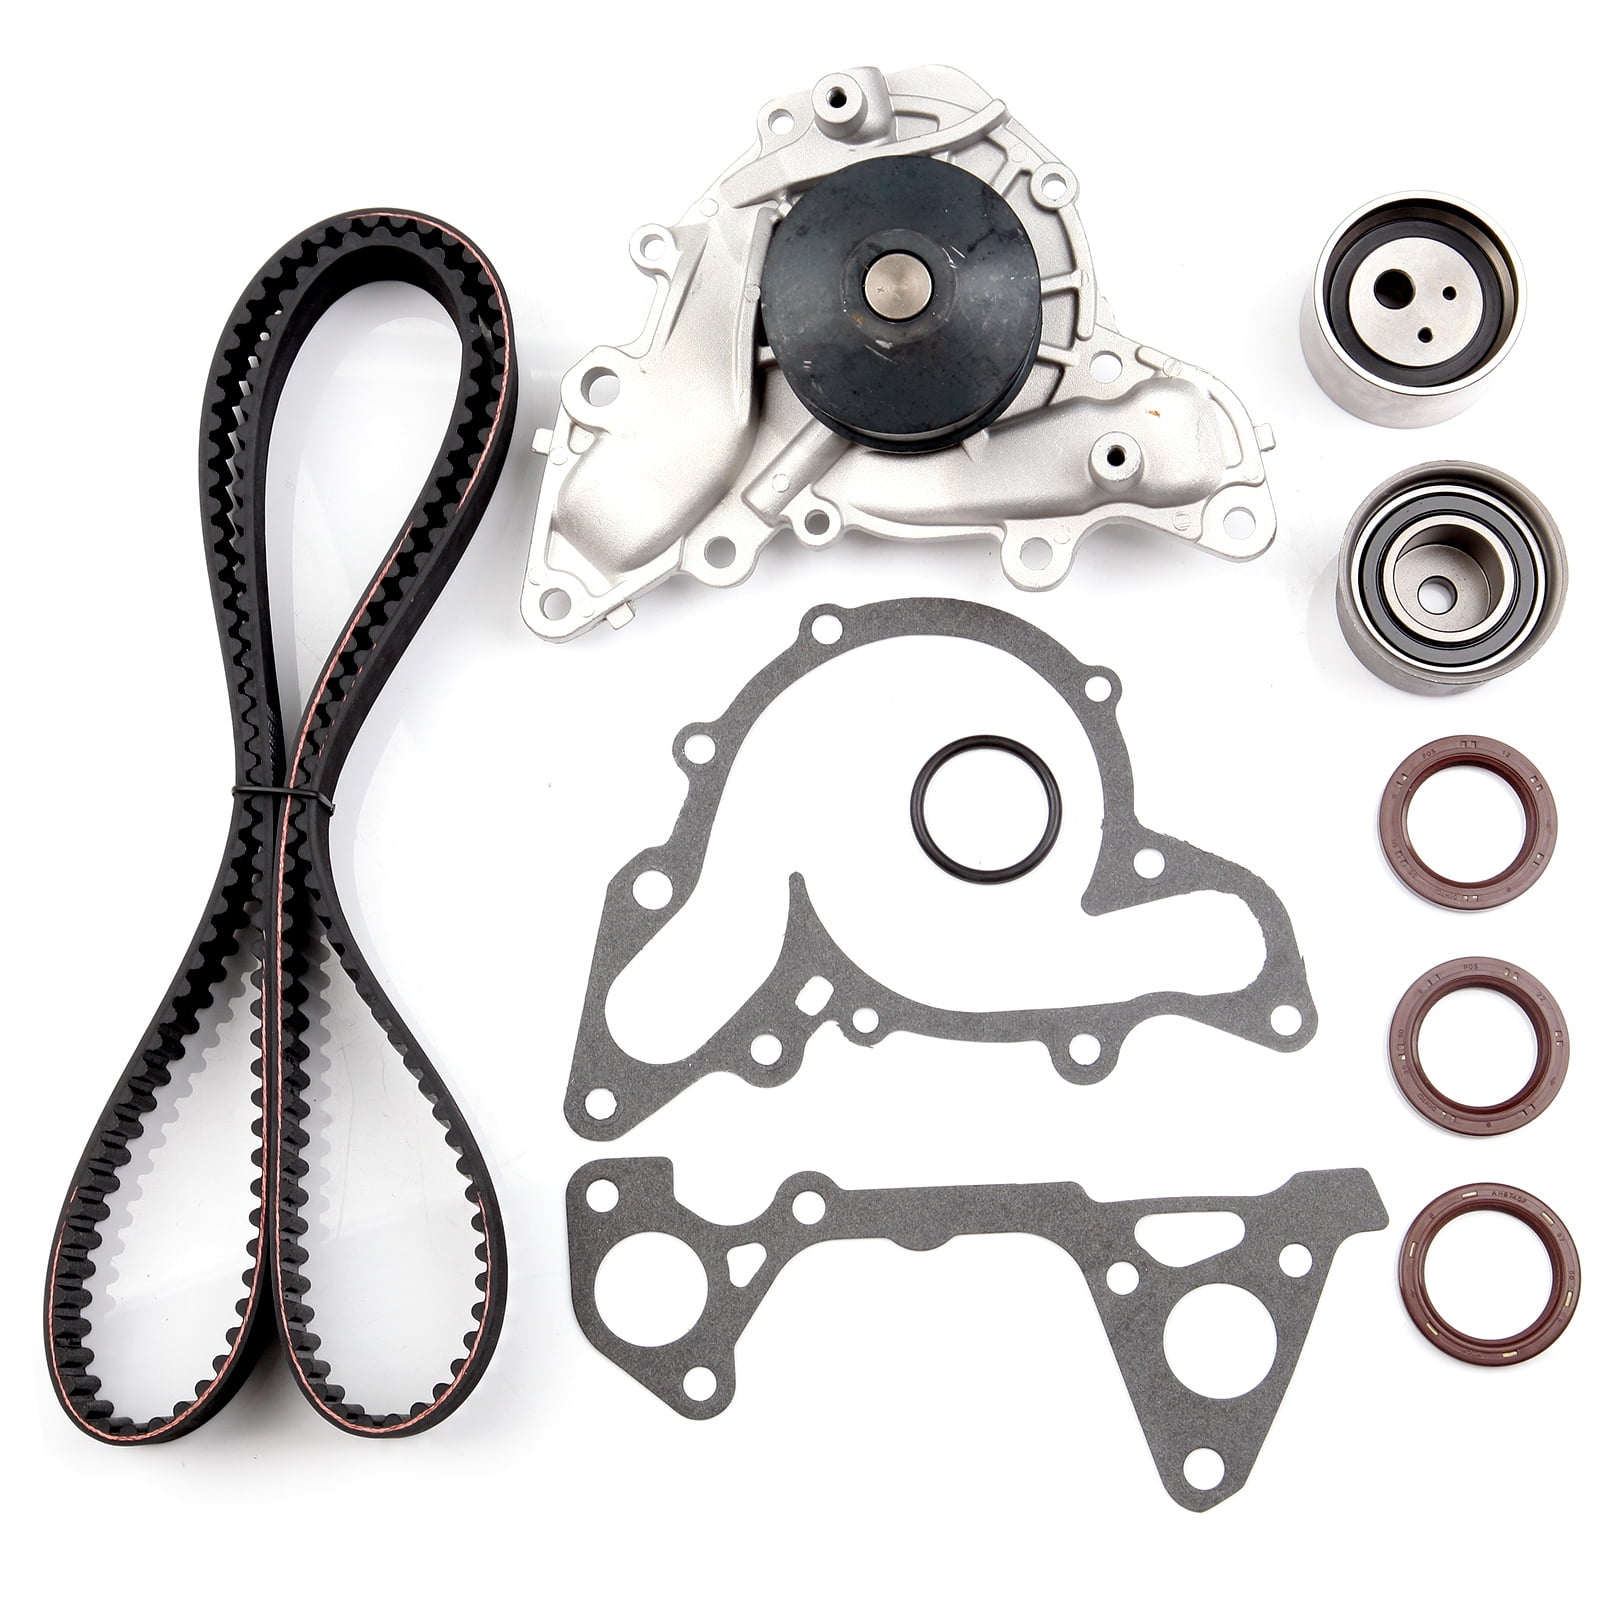 AISIN Timing Belt Kit with Water Pump for 1997-2003 Mitsubishi Montero Sport xp